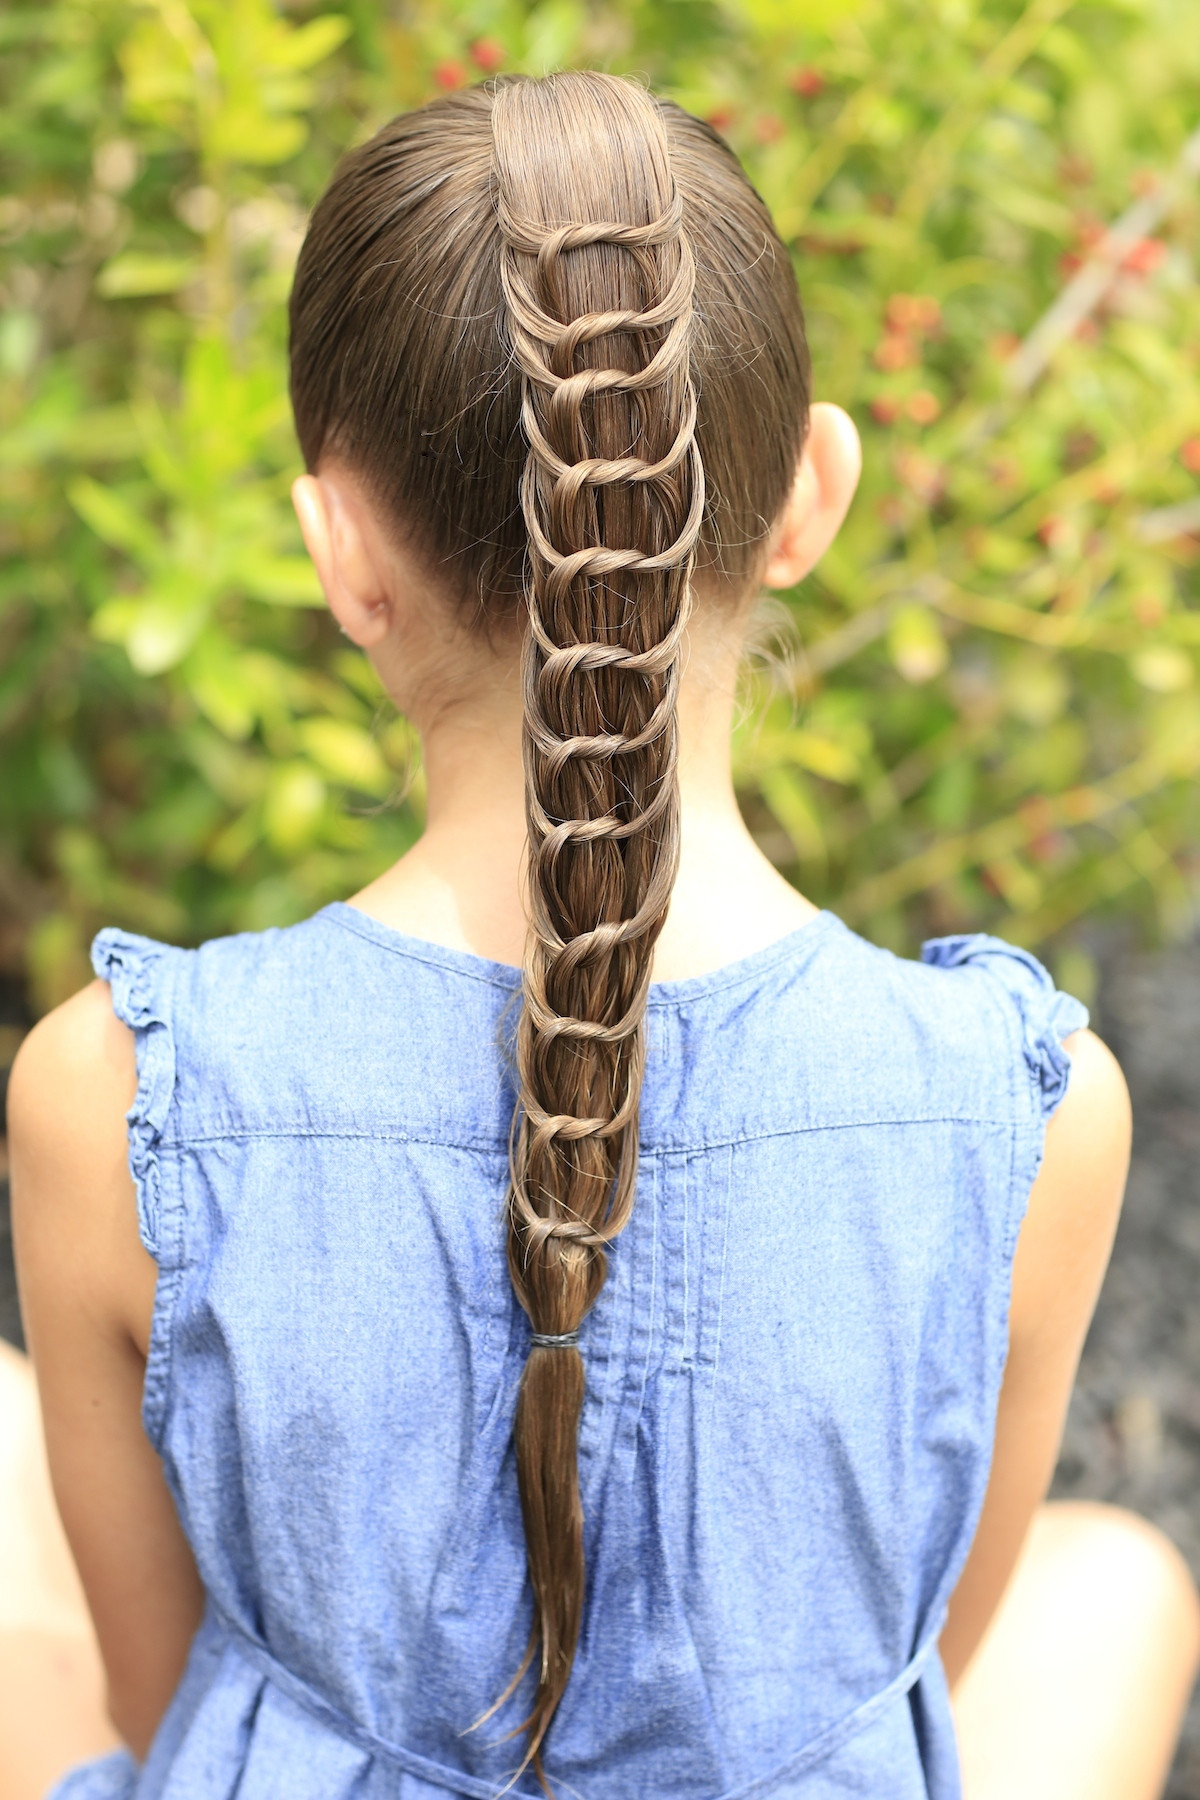 Cute Girls Hairstyles
 The Knotted Ponytail Hairstyles for Girls